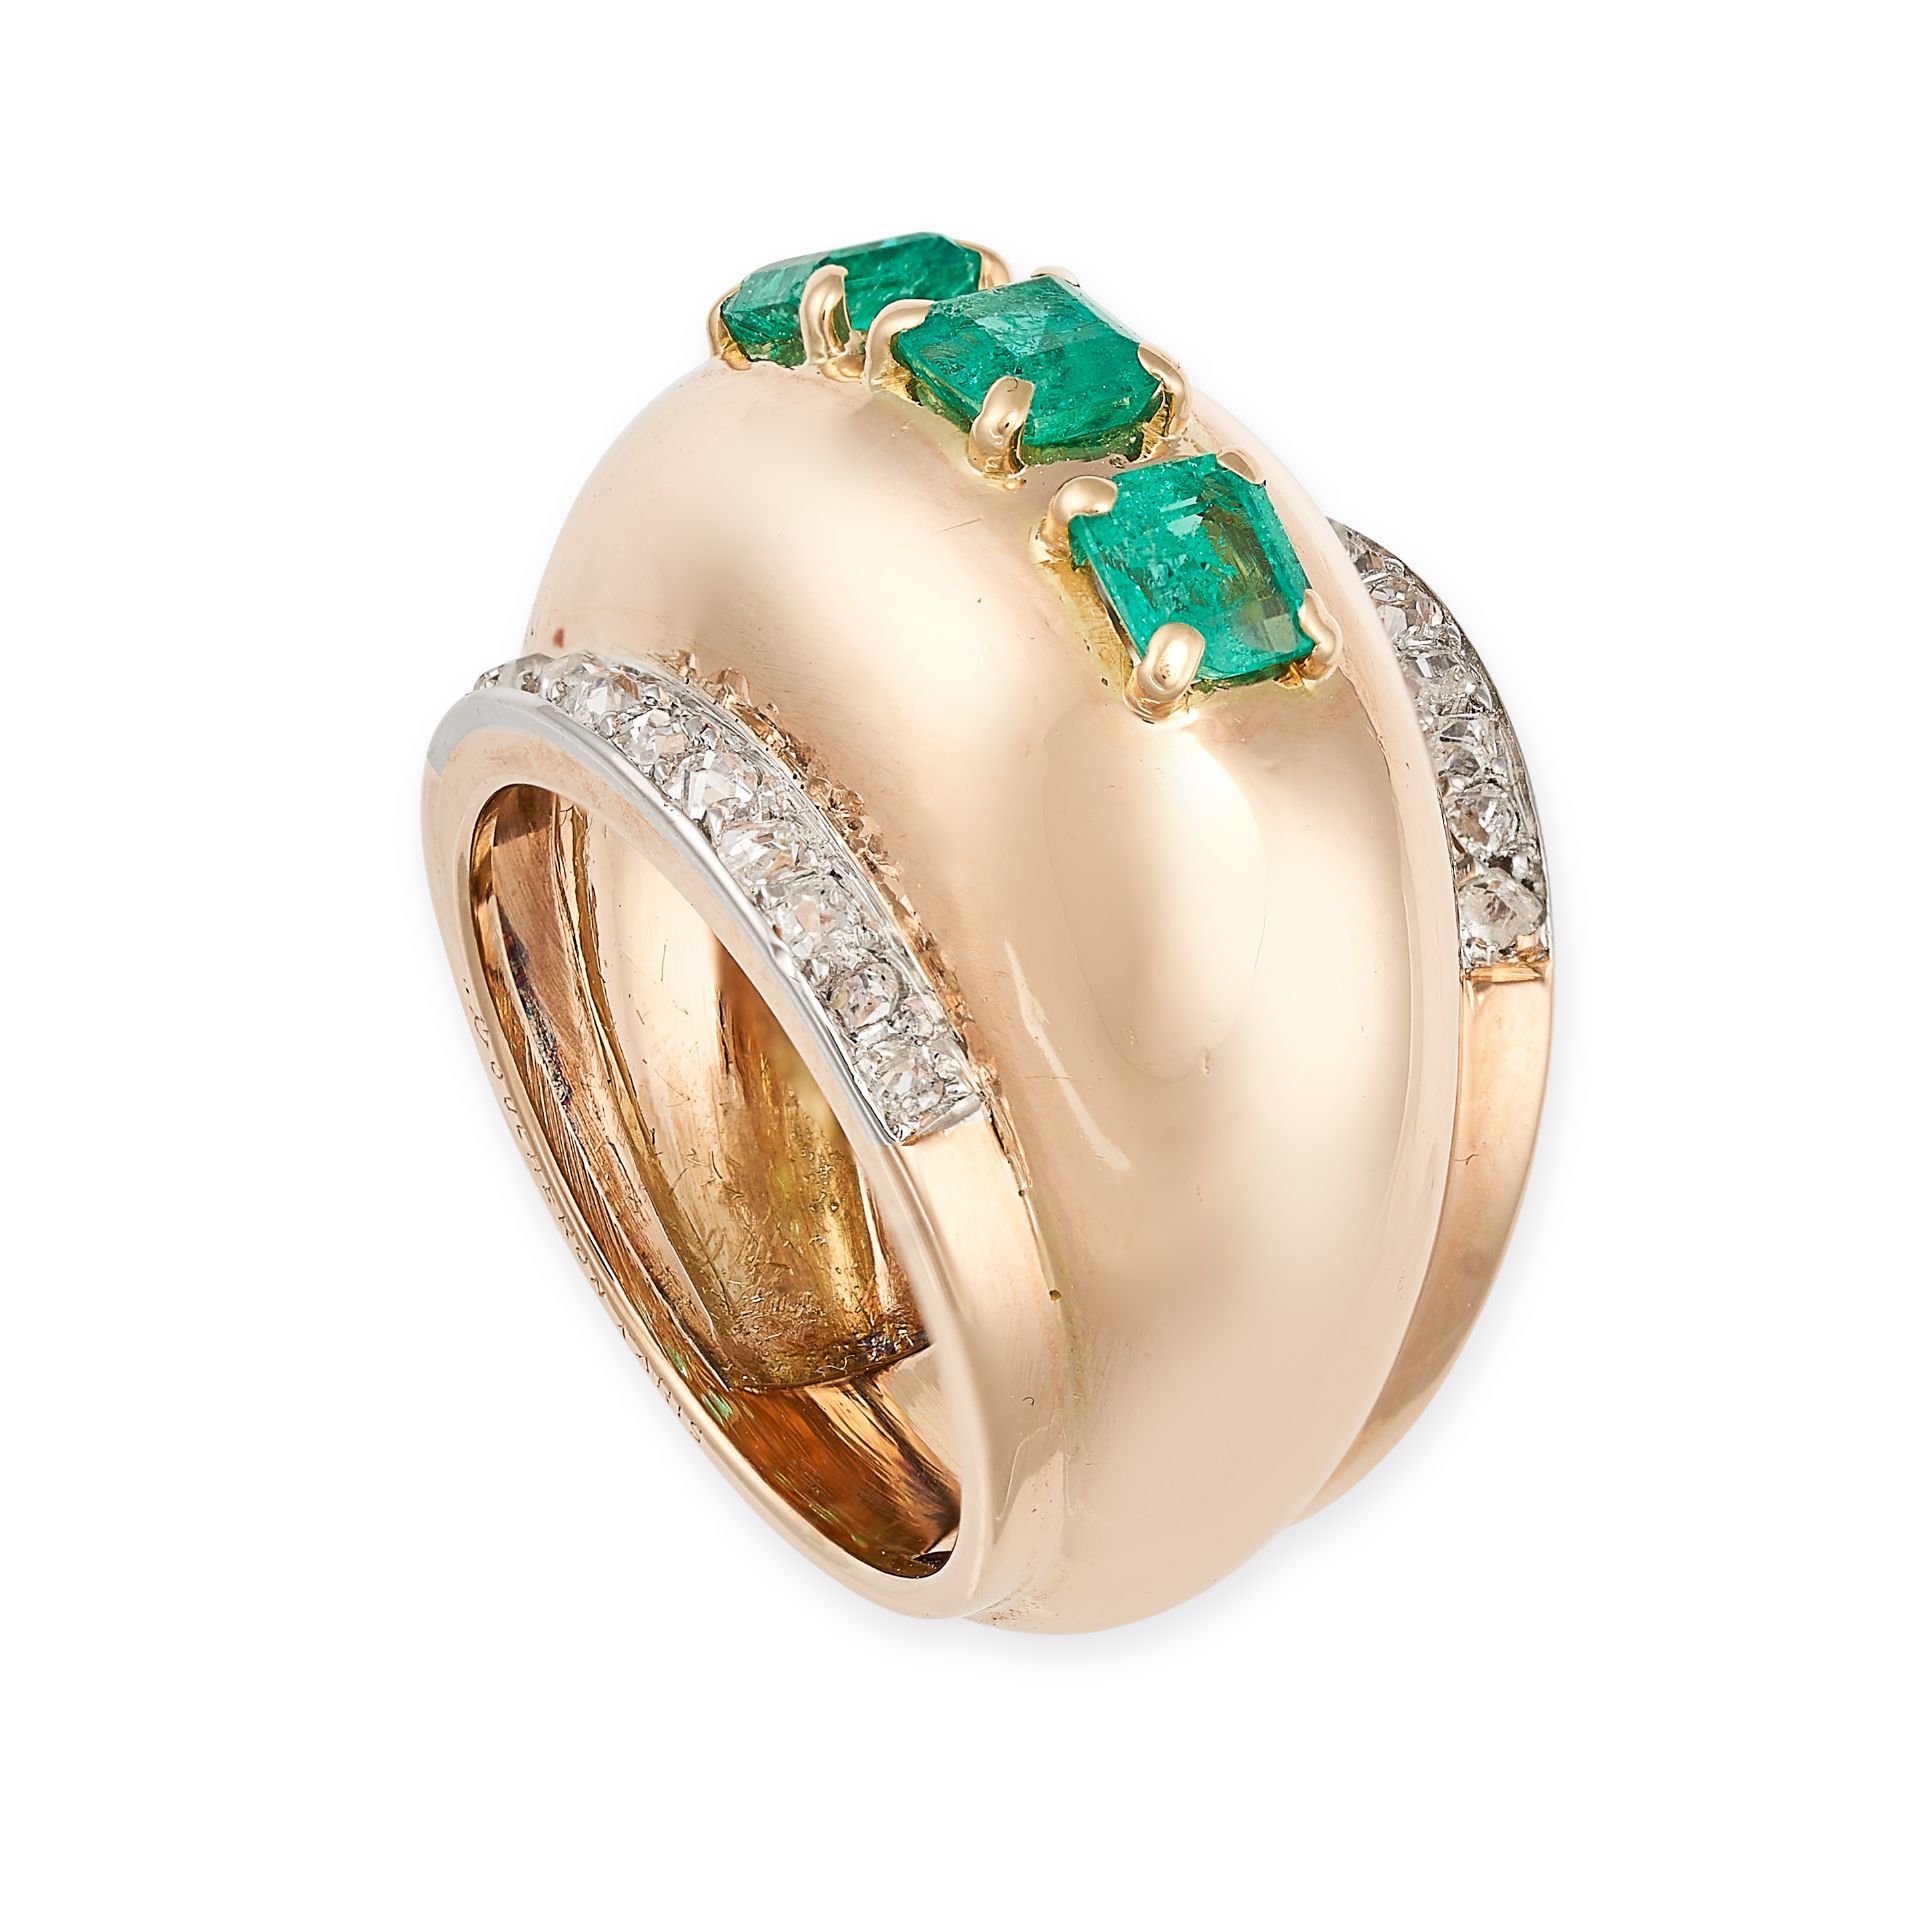 BOUCHERON, A RETRO EMERALD AND DIAMOND BOMBE RING in 18ct rose gold and platinum, the domed face set - Image 2 of 2